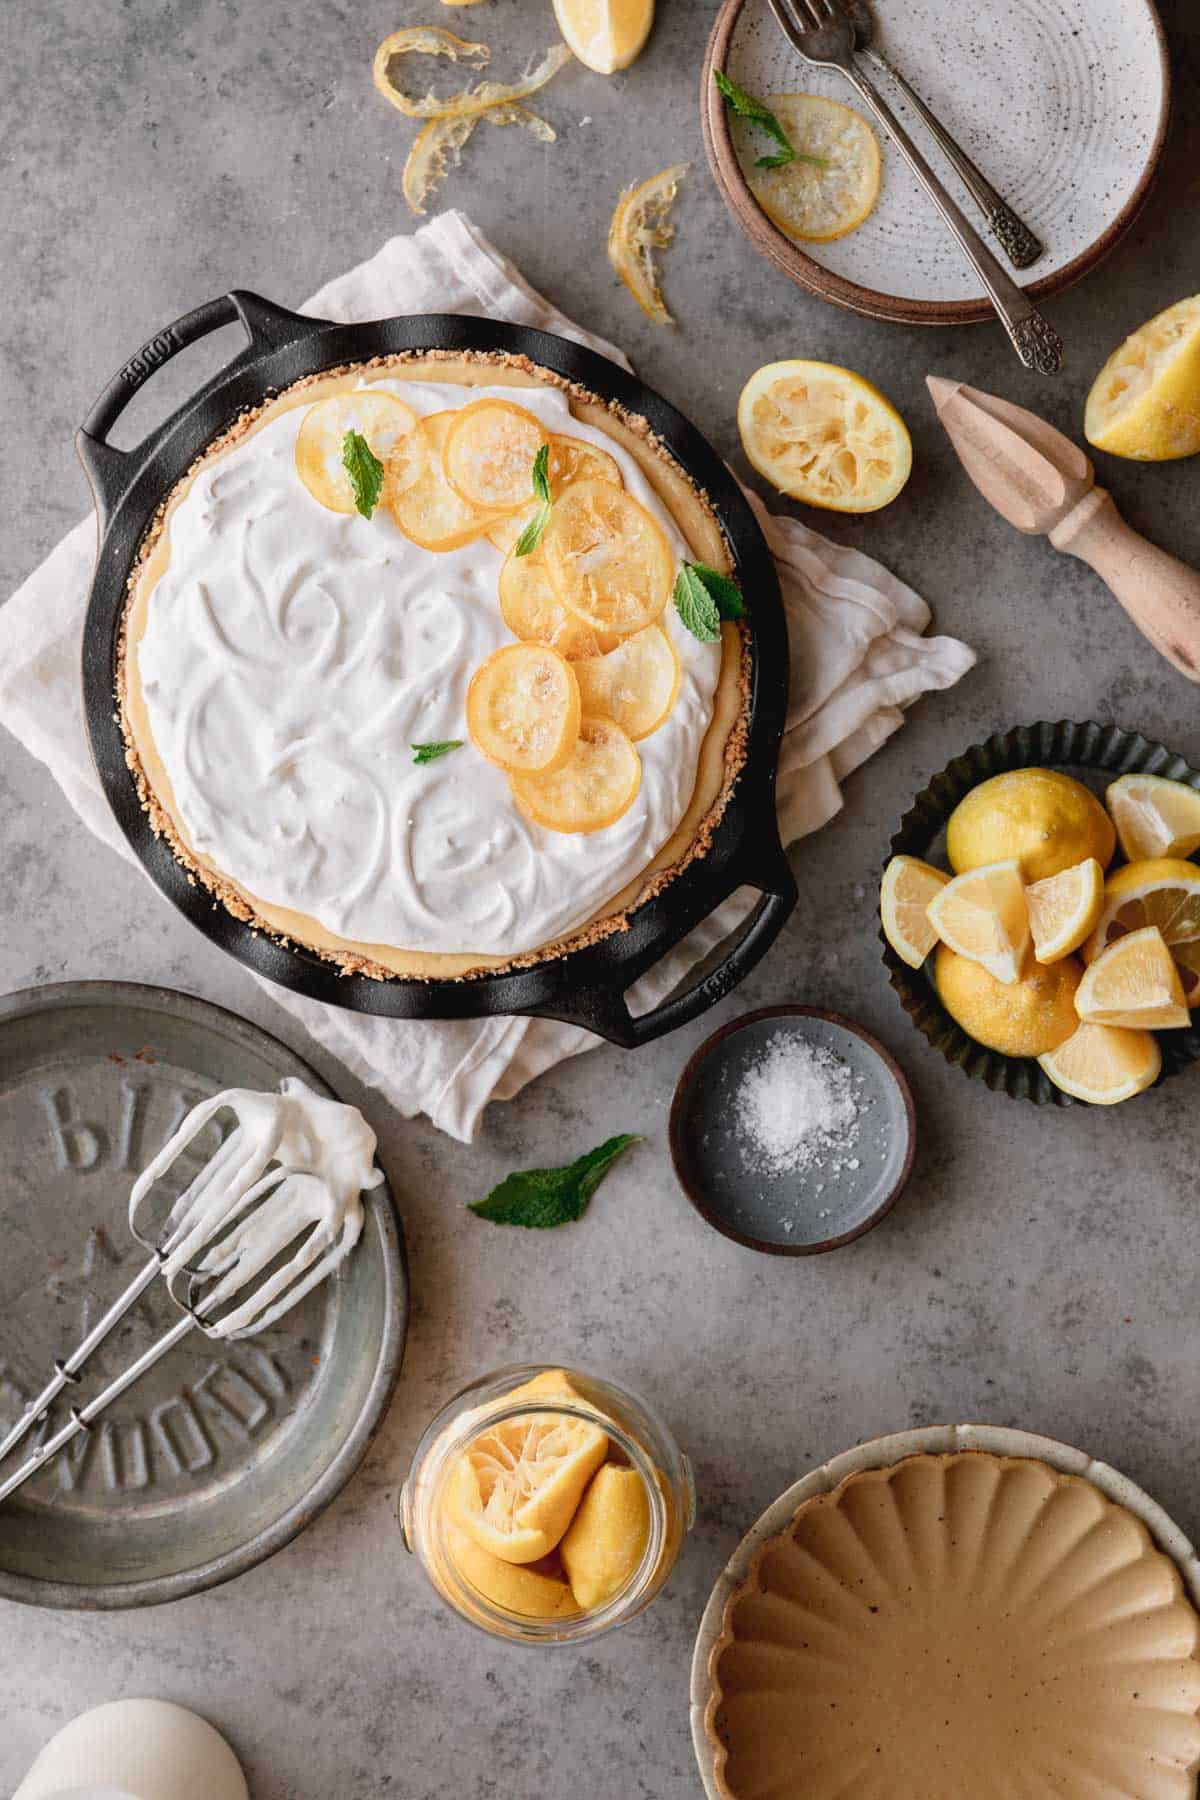 Creamy Lemon Pie topped with candied lemon.